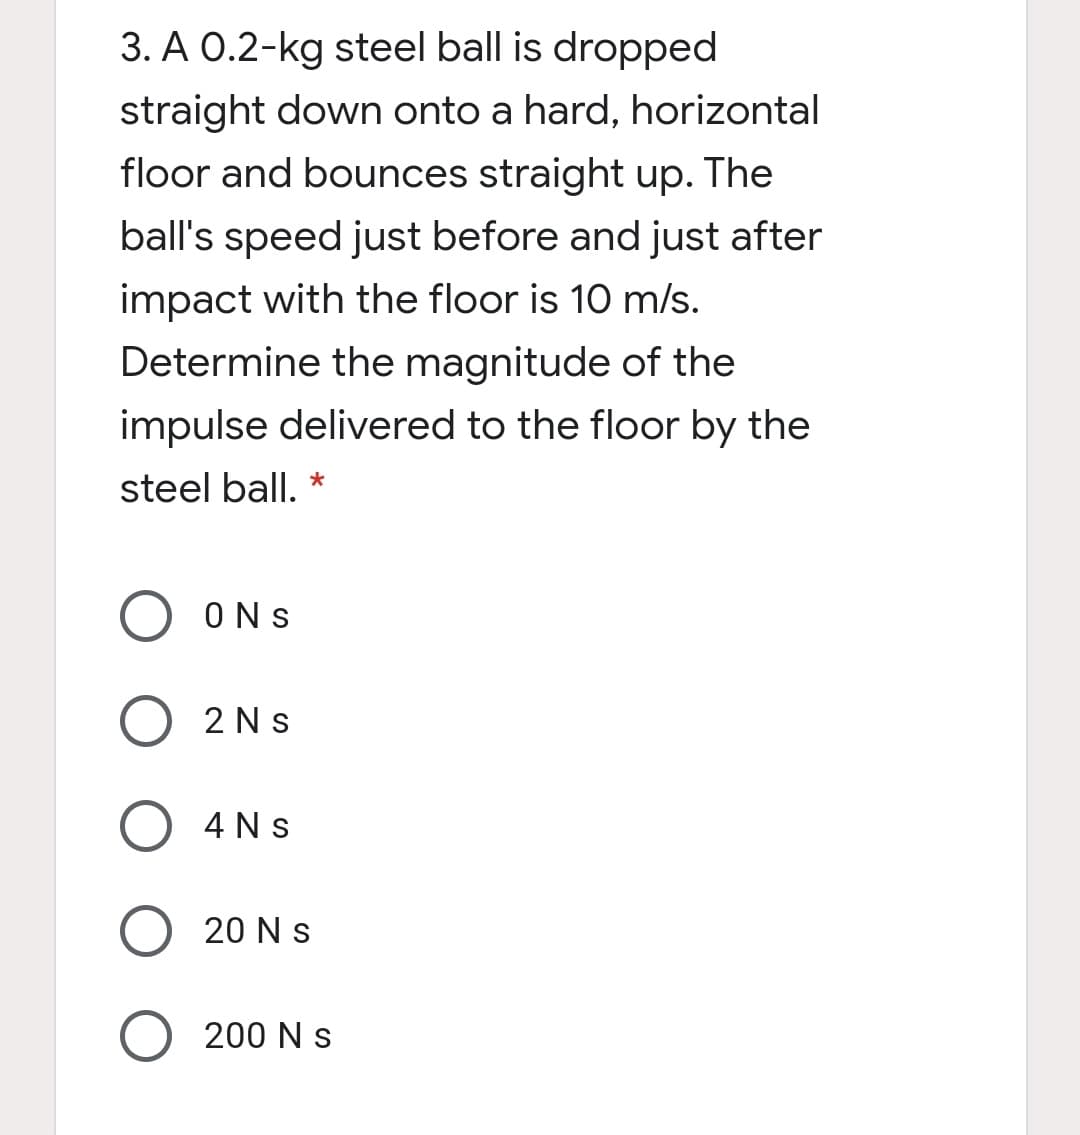 3. A 0.2-kg steel ball is dropped
straight down onto a hard, horizontal
floor and bounces straight up. The
ball's speed just before and just after
impact with the floor is 10 m/s.
Determine the magnitude of the
impulse delivered to the floor by the
steel ball. *
ONS
2 Ns
4 Ns
O 20 N s
200 N s
